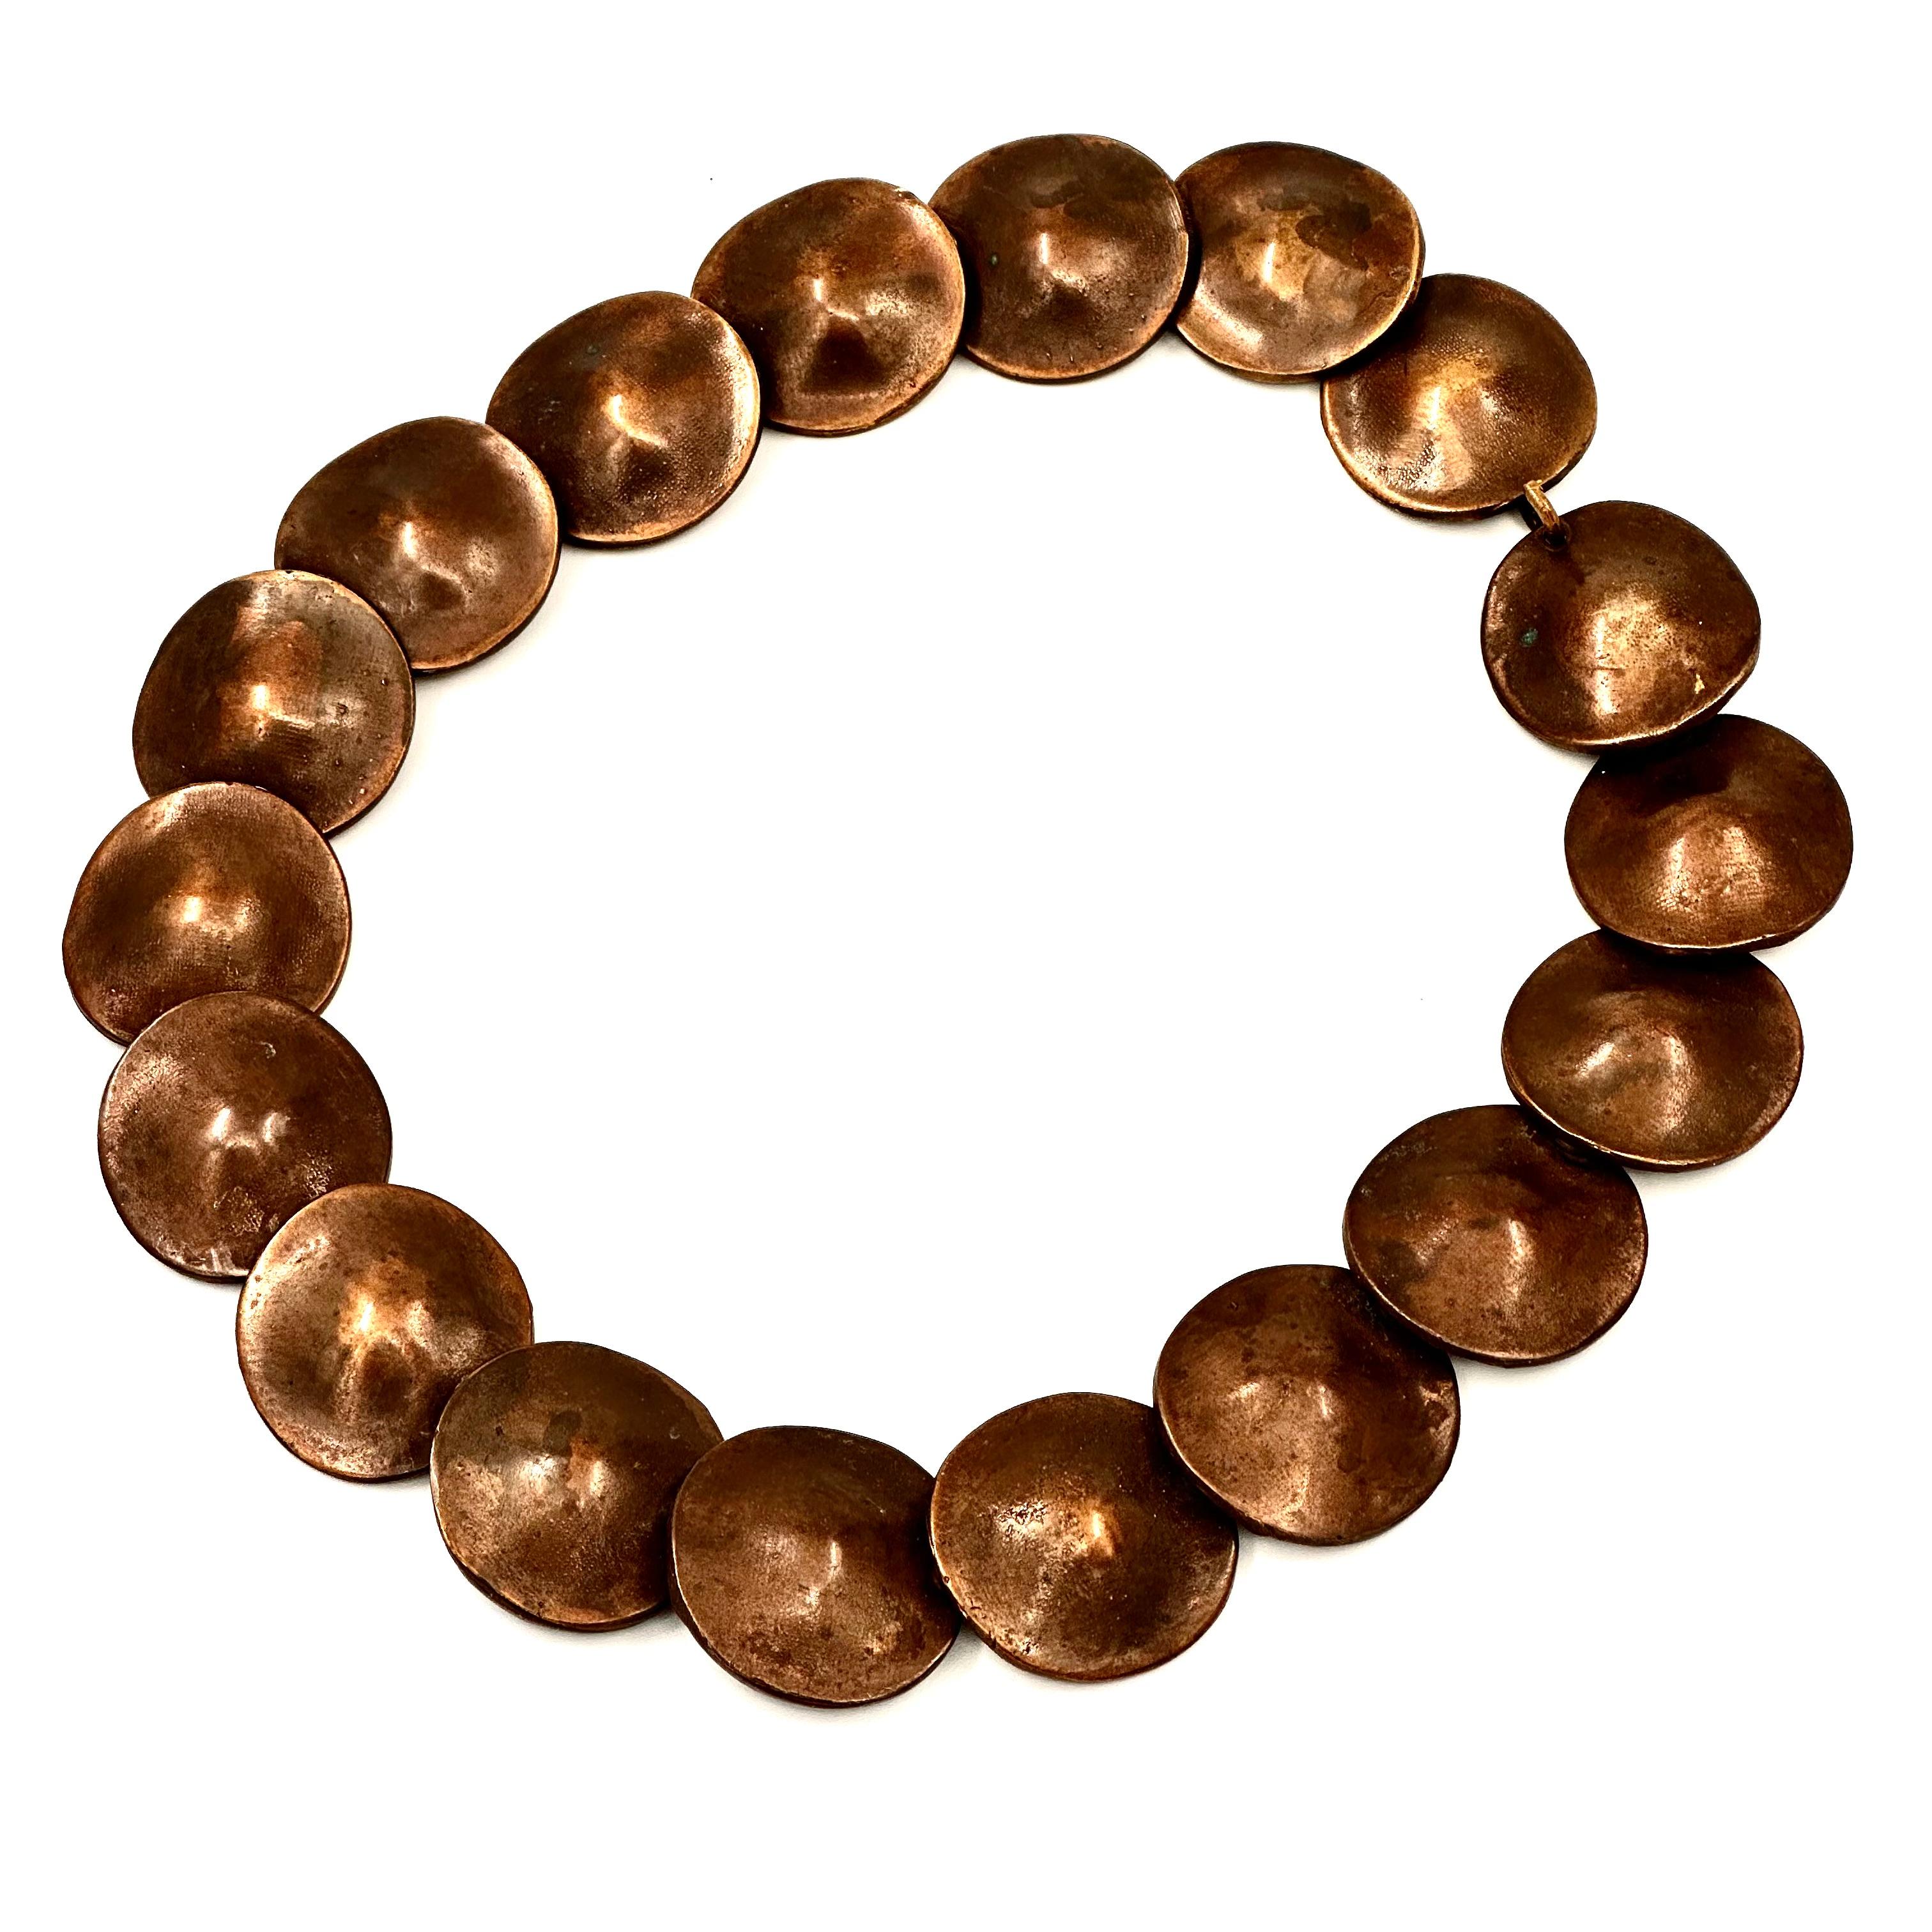 Created in 1981 for the Calvin Klein fall collection, this is an oxidized brass disc belt, iconic Robert Lee Morris form, with a Wabi Sabi coloration and finish. It is basically a brownish bronze color, so chic and understated but dramatic as can